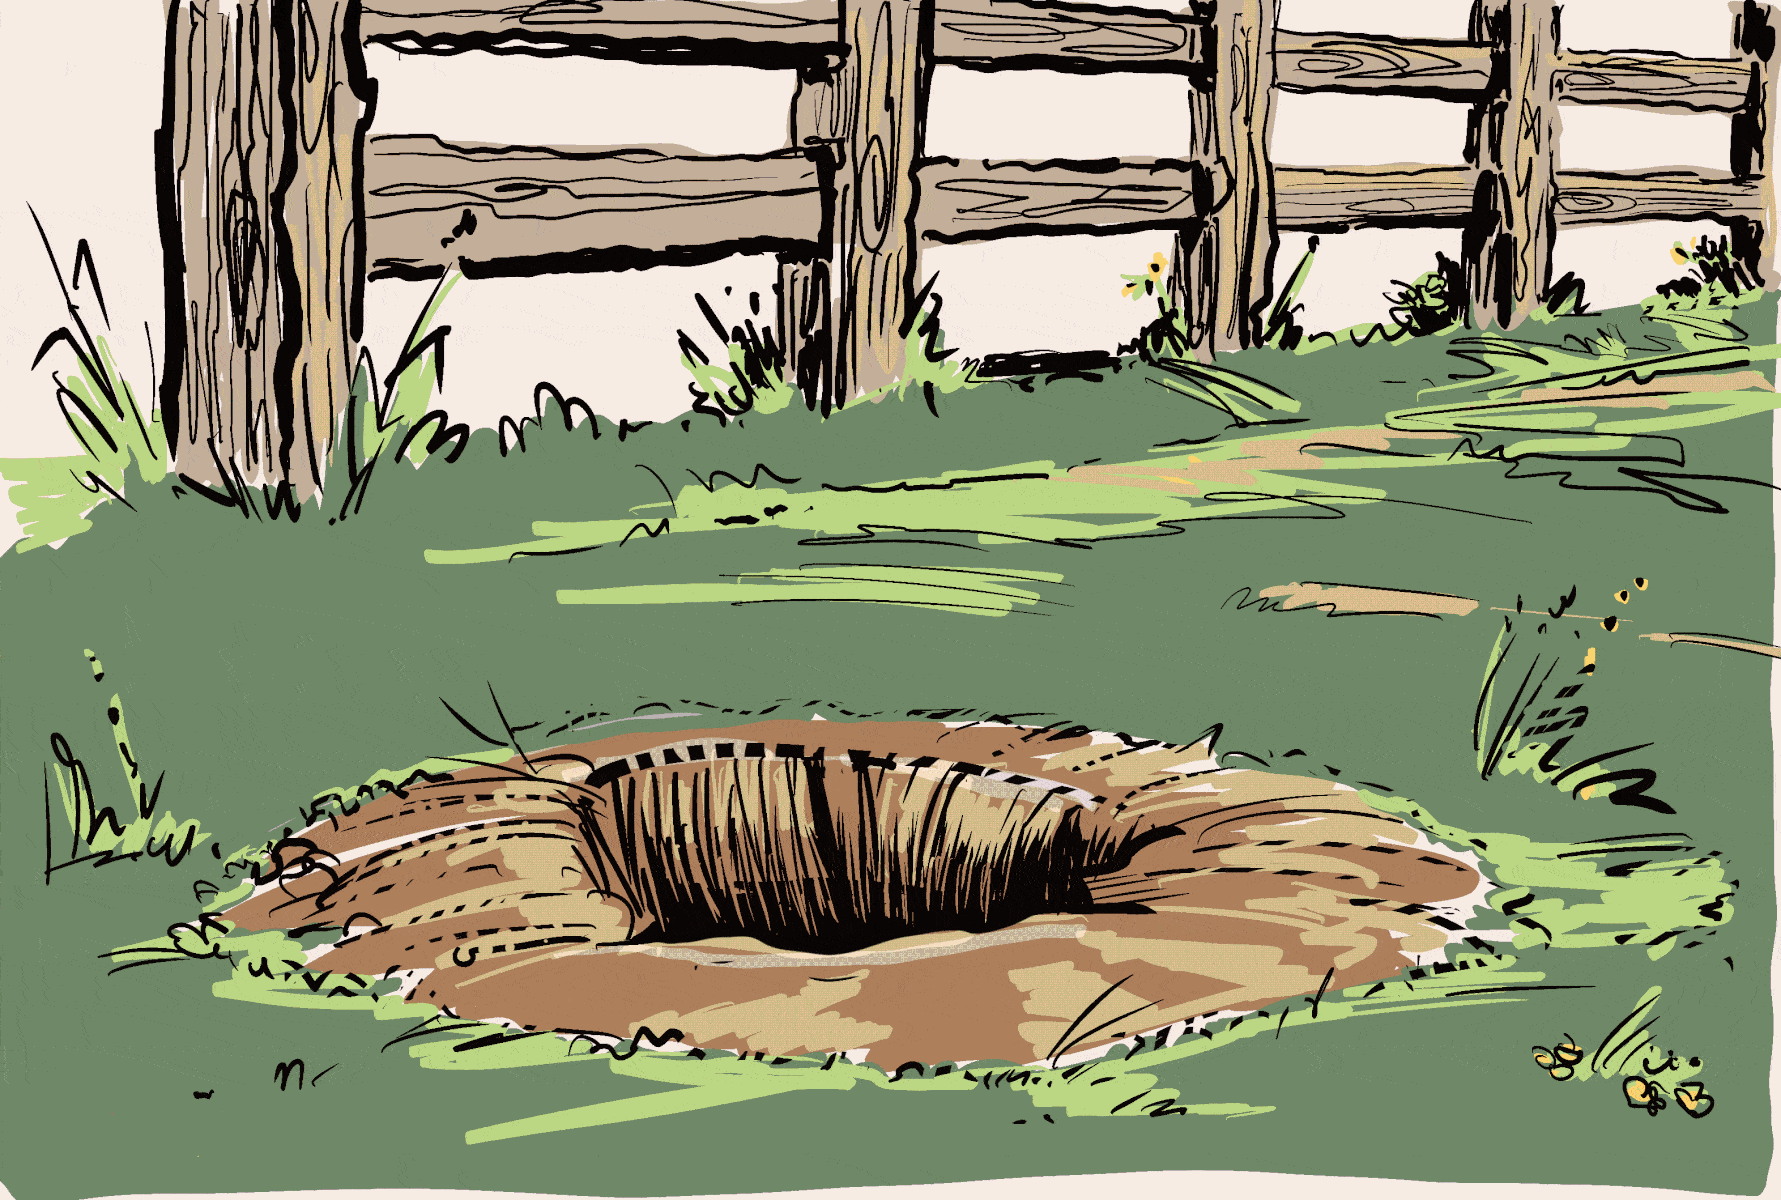 Animation of the HokieBird popping out of the groundhog hole